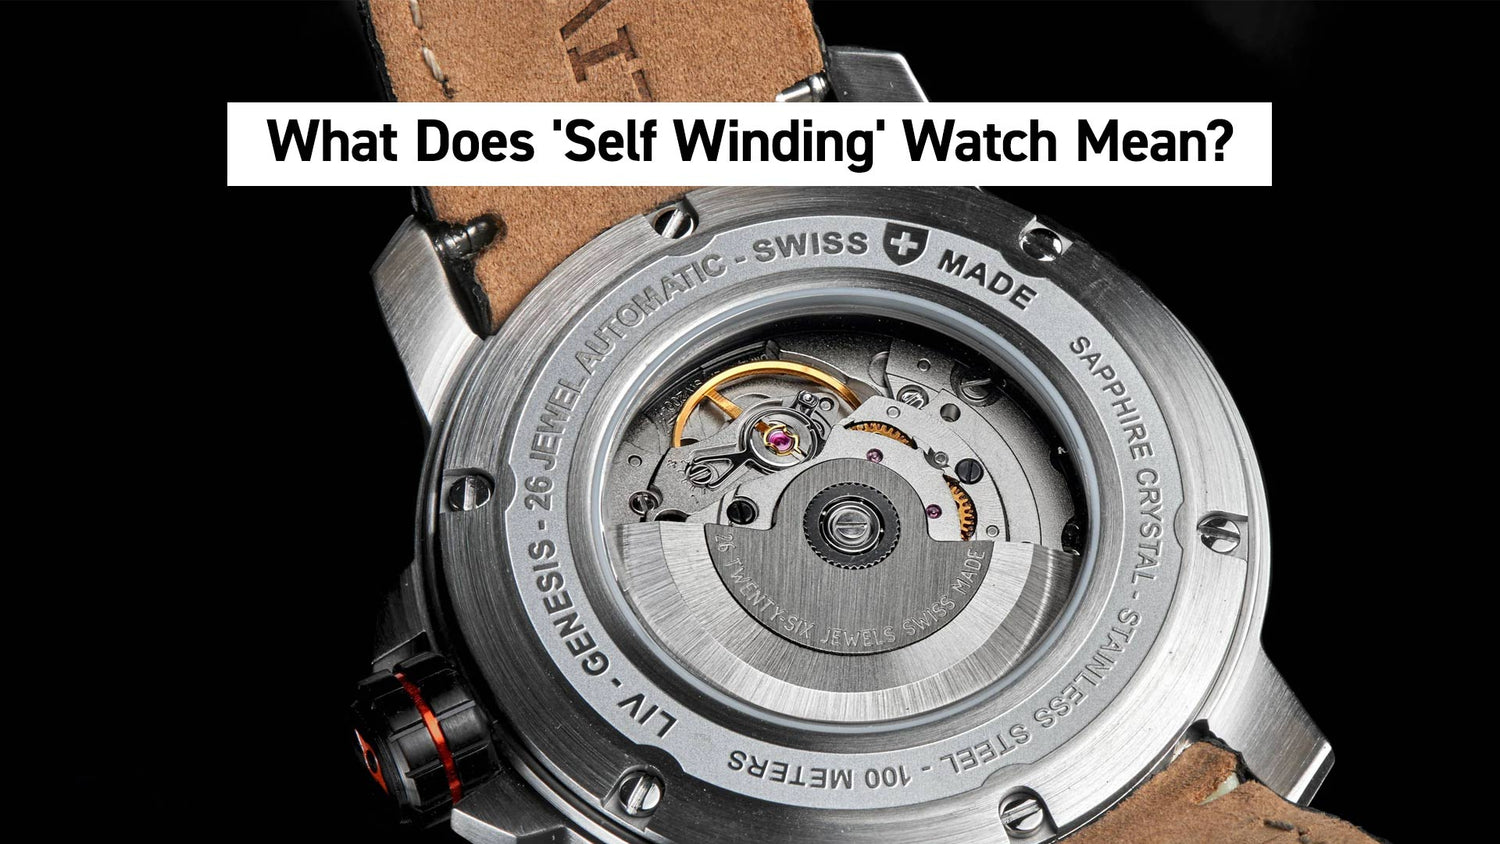 What Does 'Self Winding' Watch Mean?